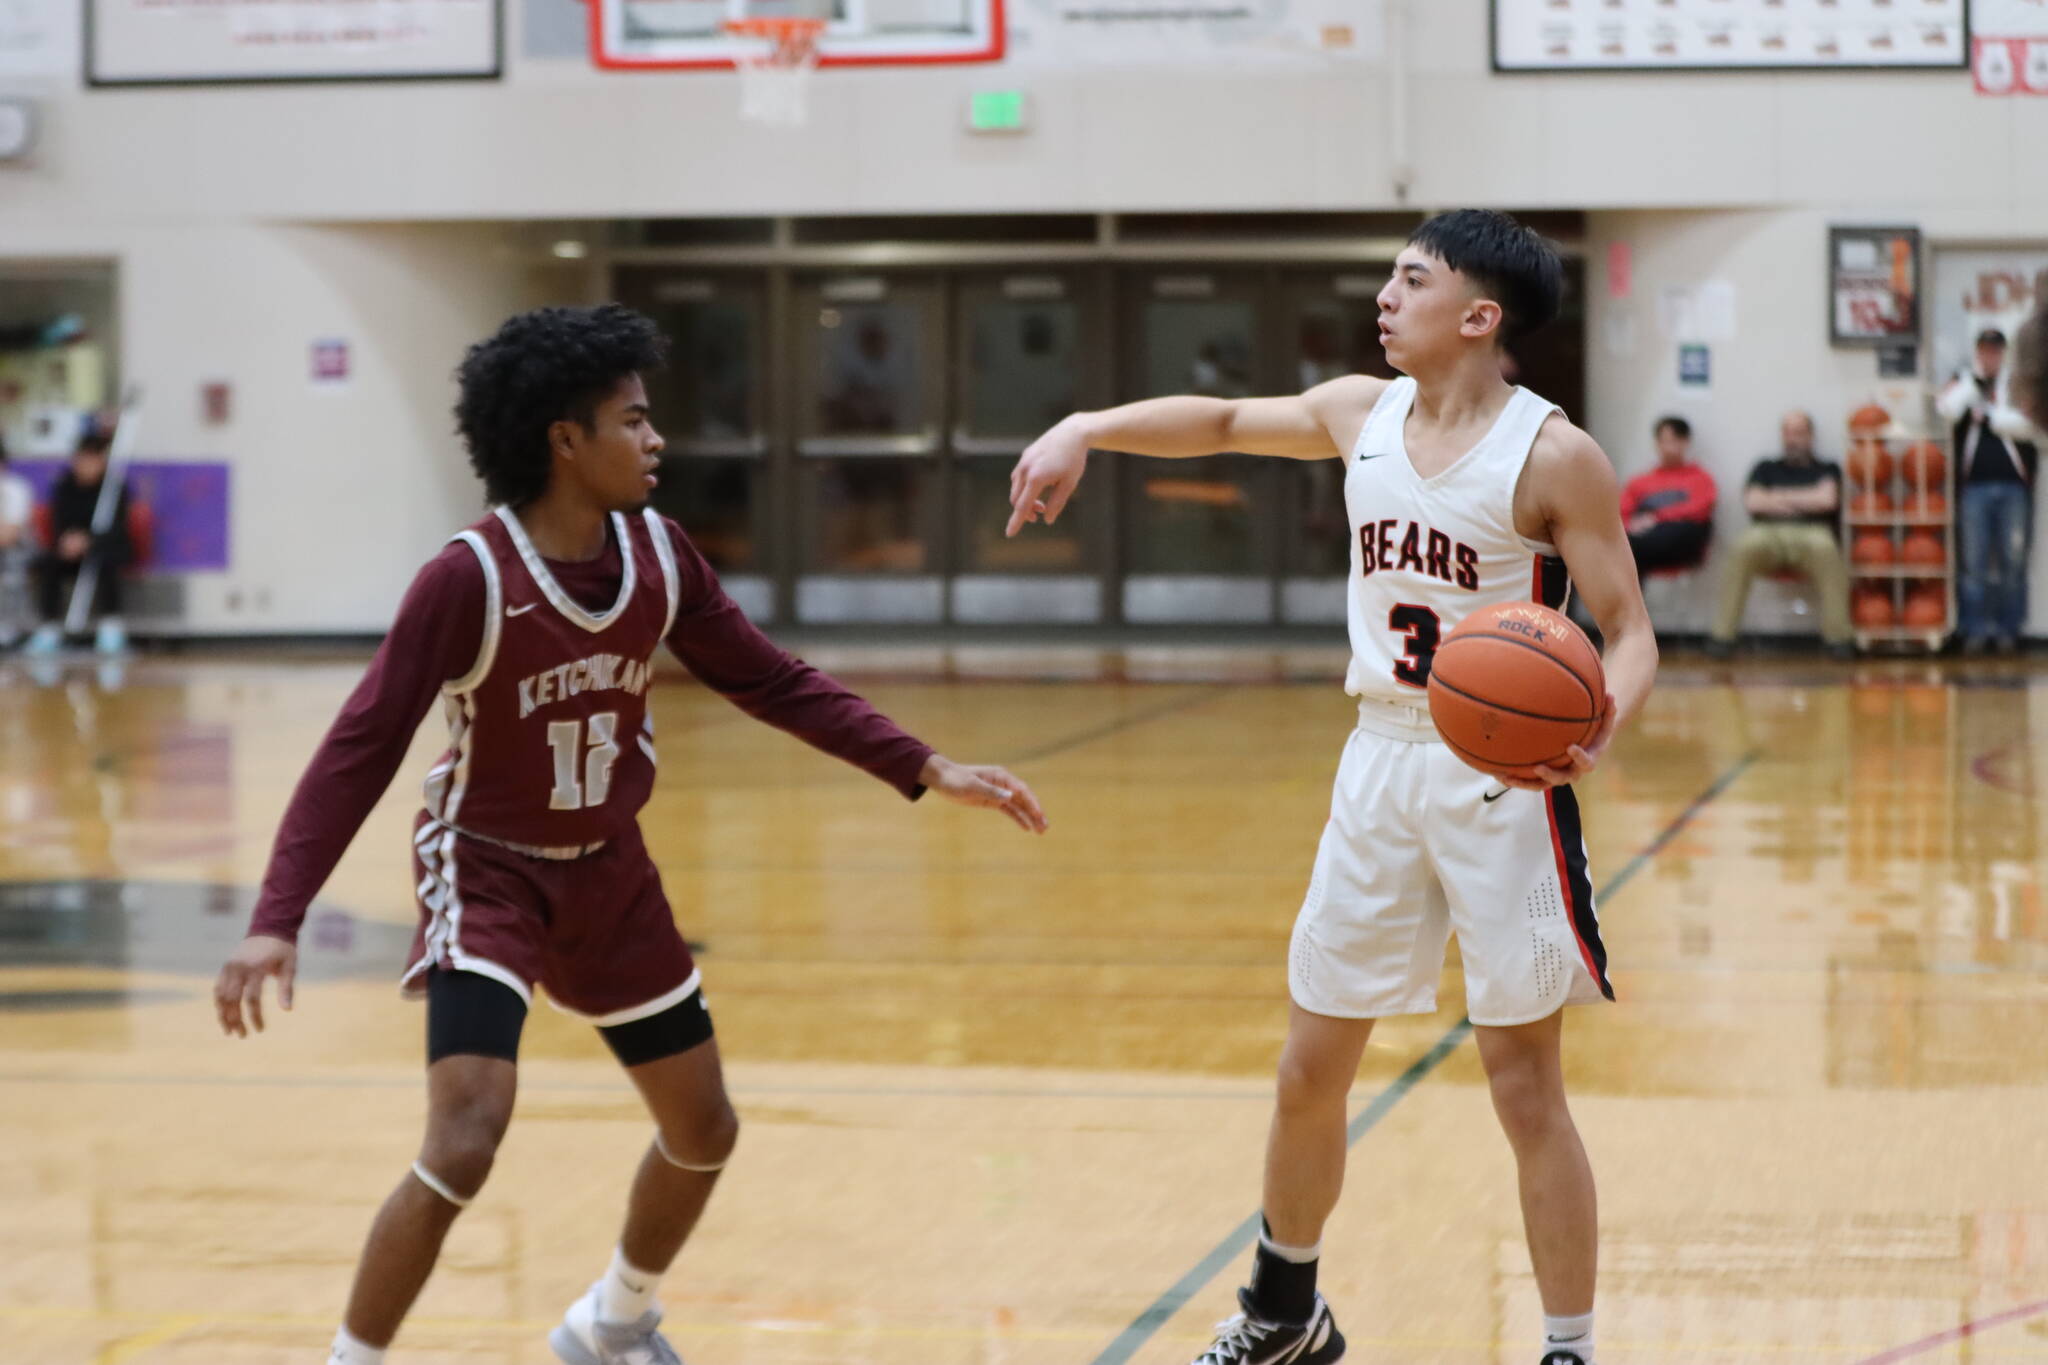 JDHS junior Alwen Carrillo sets up offense during a conference game against Ketchikan High School Friday night at home. Carrillo led his team in scores with a total of 17 points. (Jonson Kuhn / Juneau Empire)